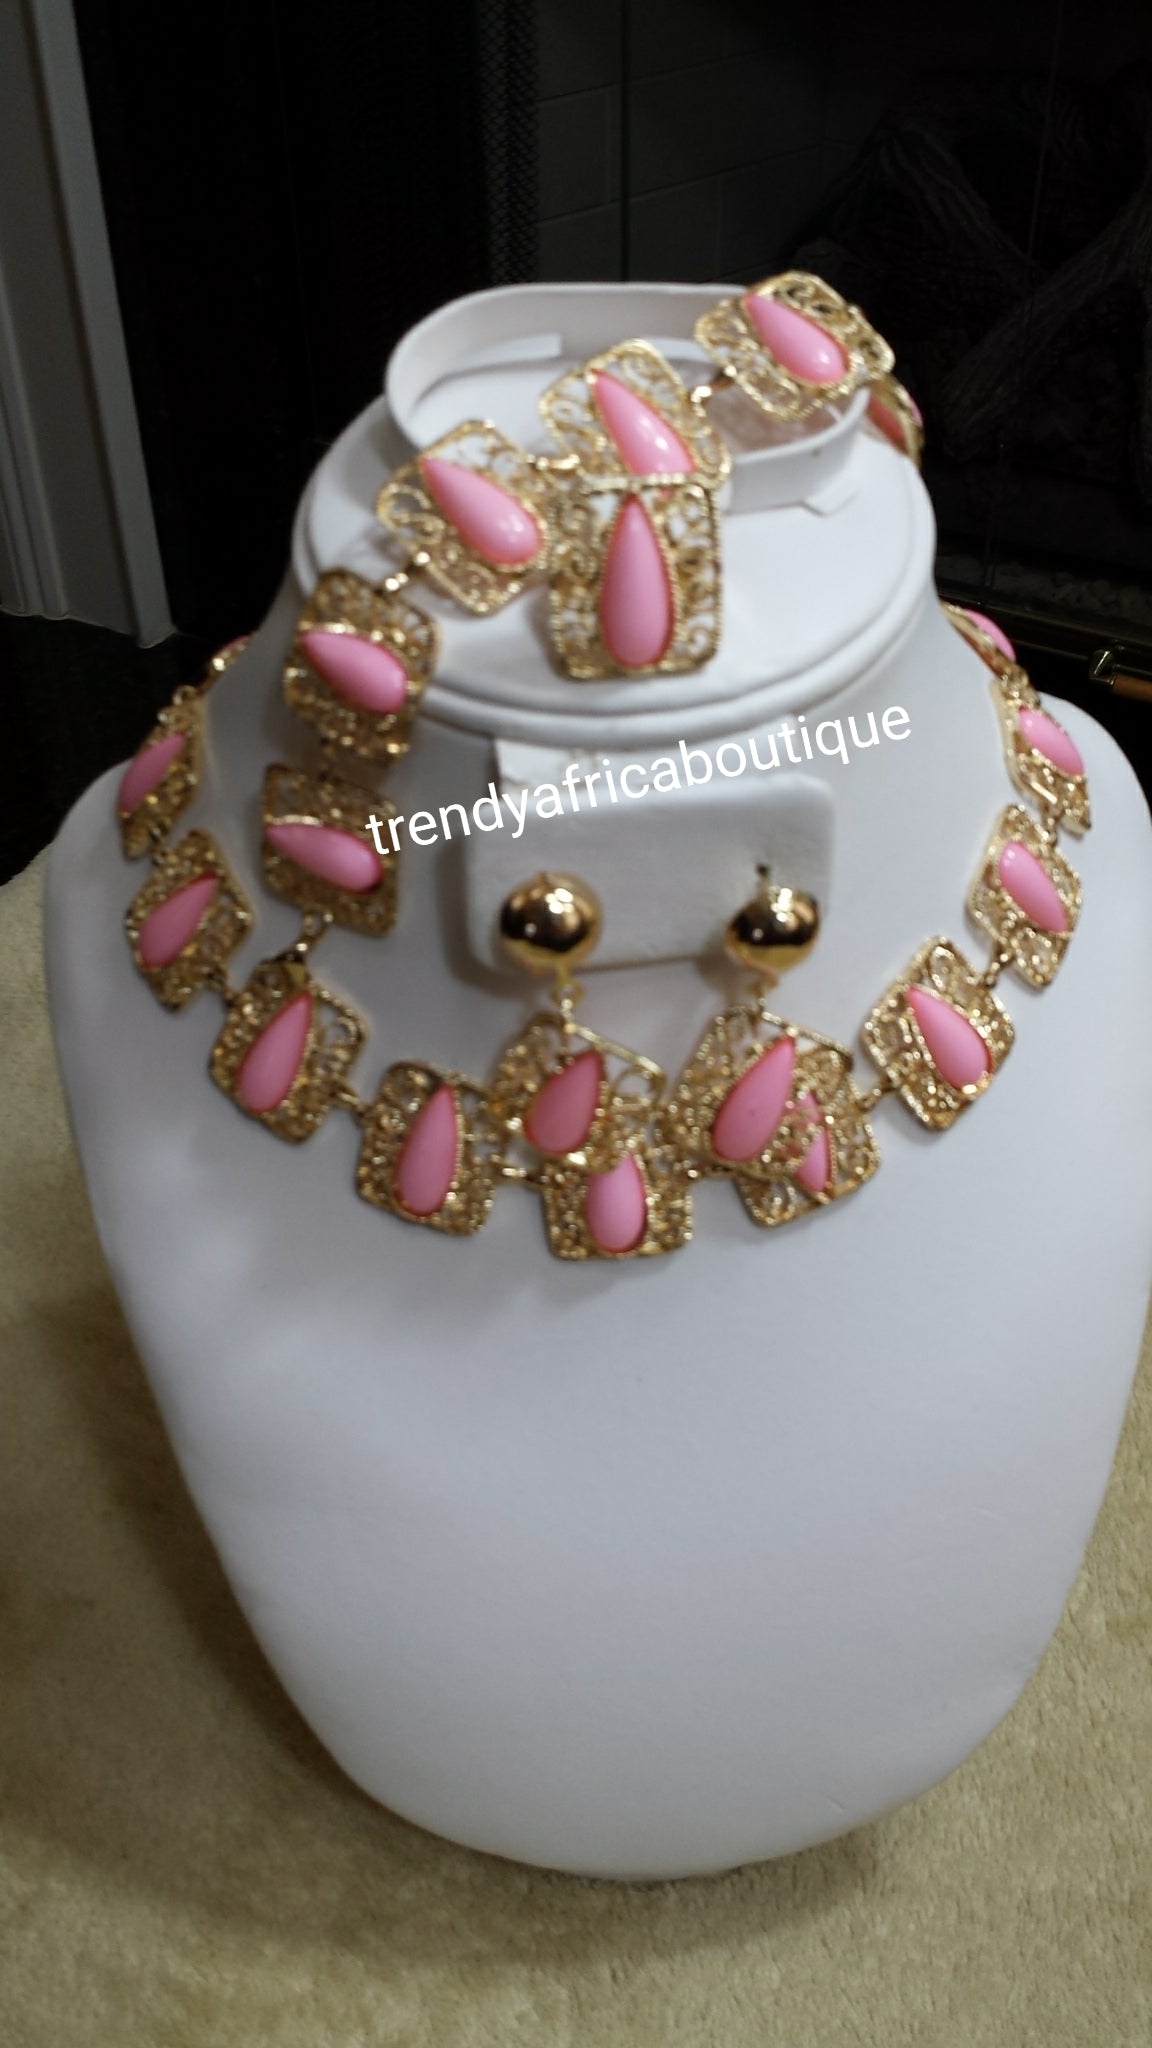 Sale: 4pc 18k gold plated necklace set. Sweet pink  bead accent. Sold as a set, price is for the set. Pink/gold and coral/gold.